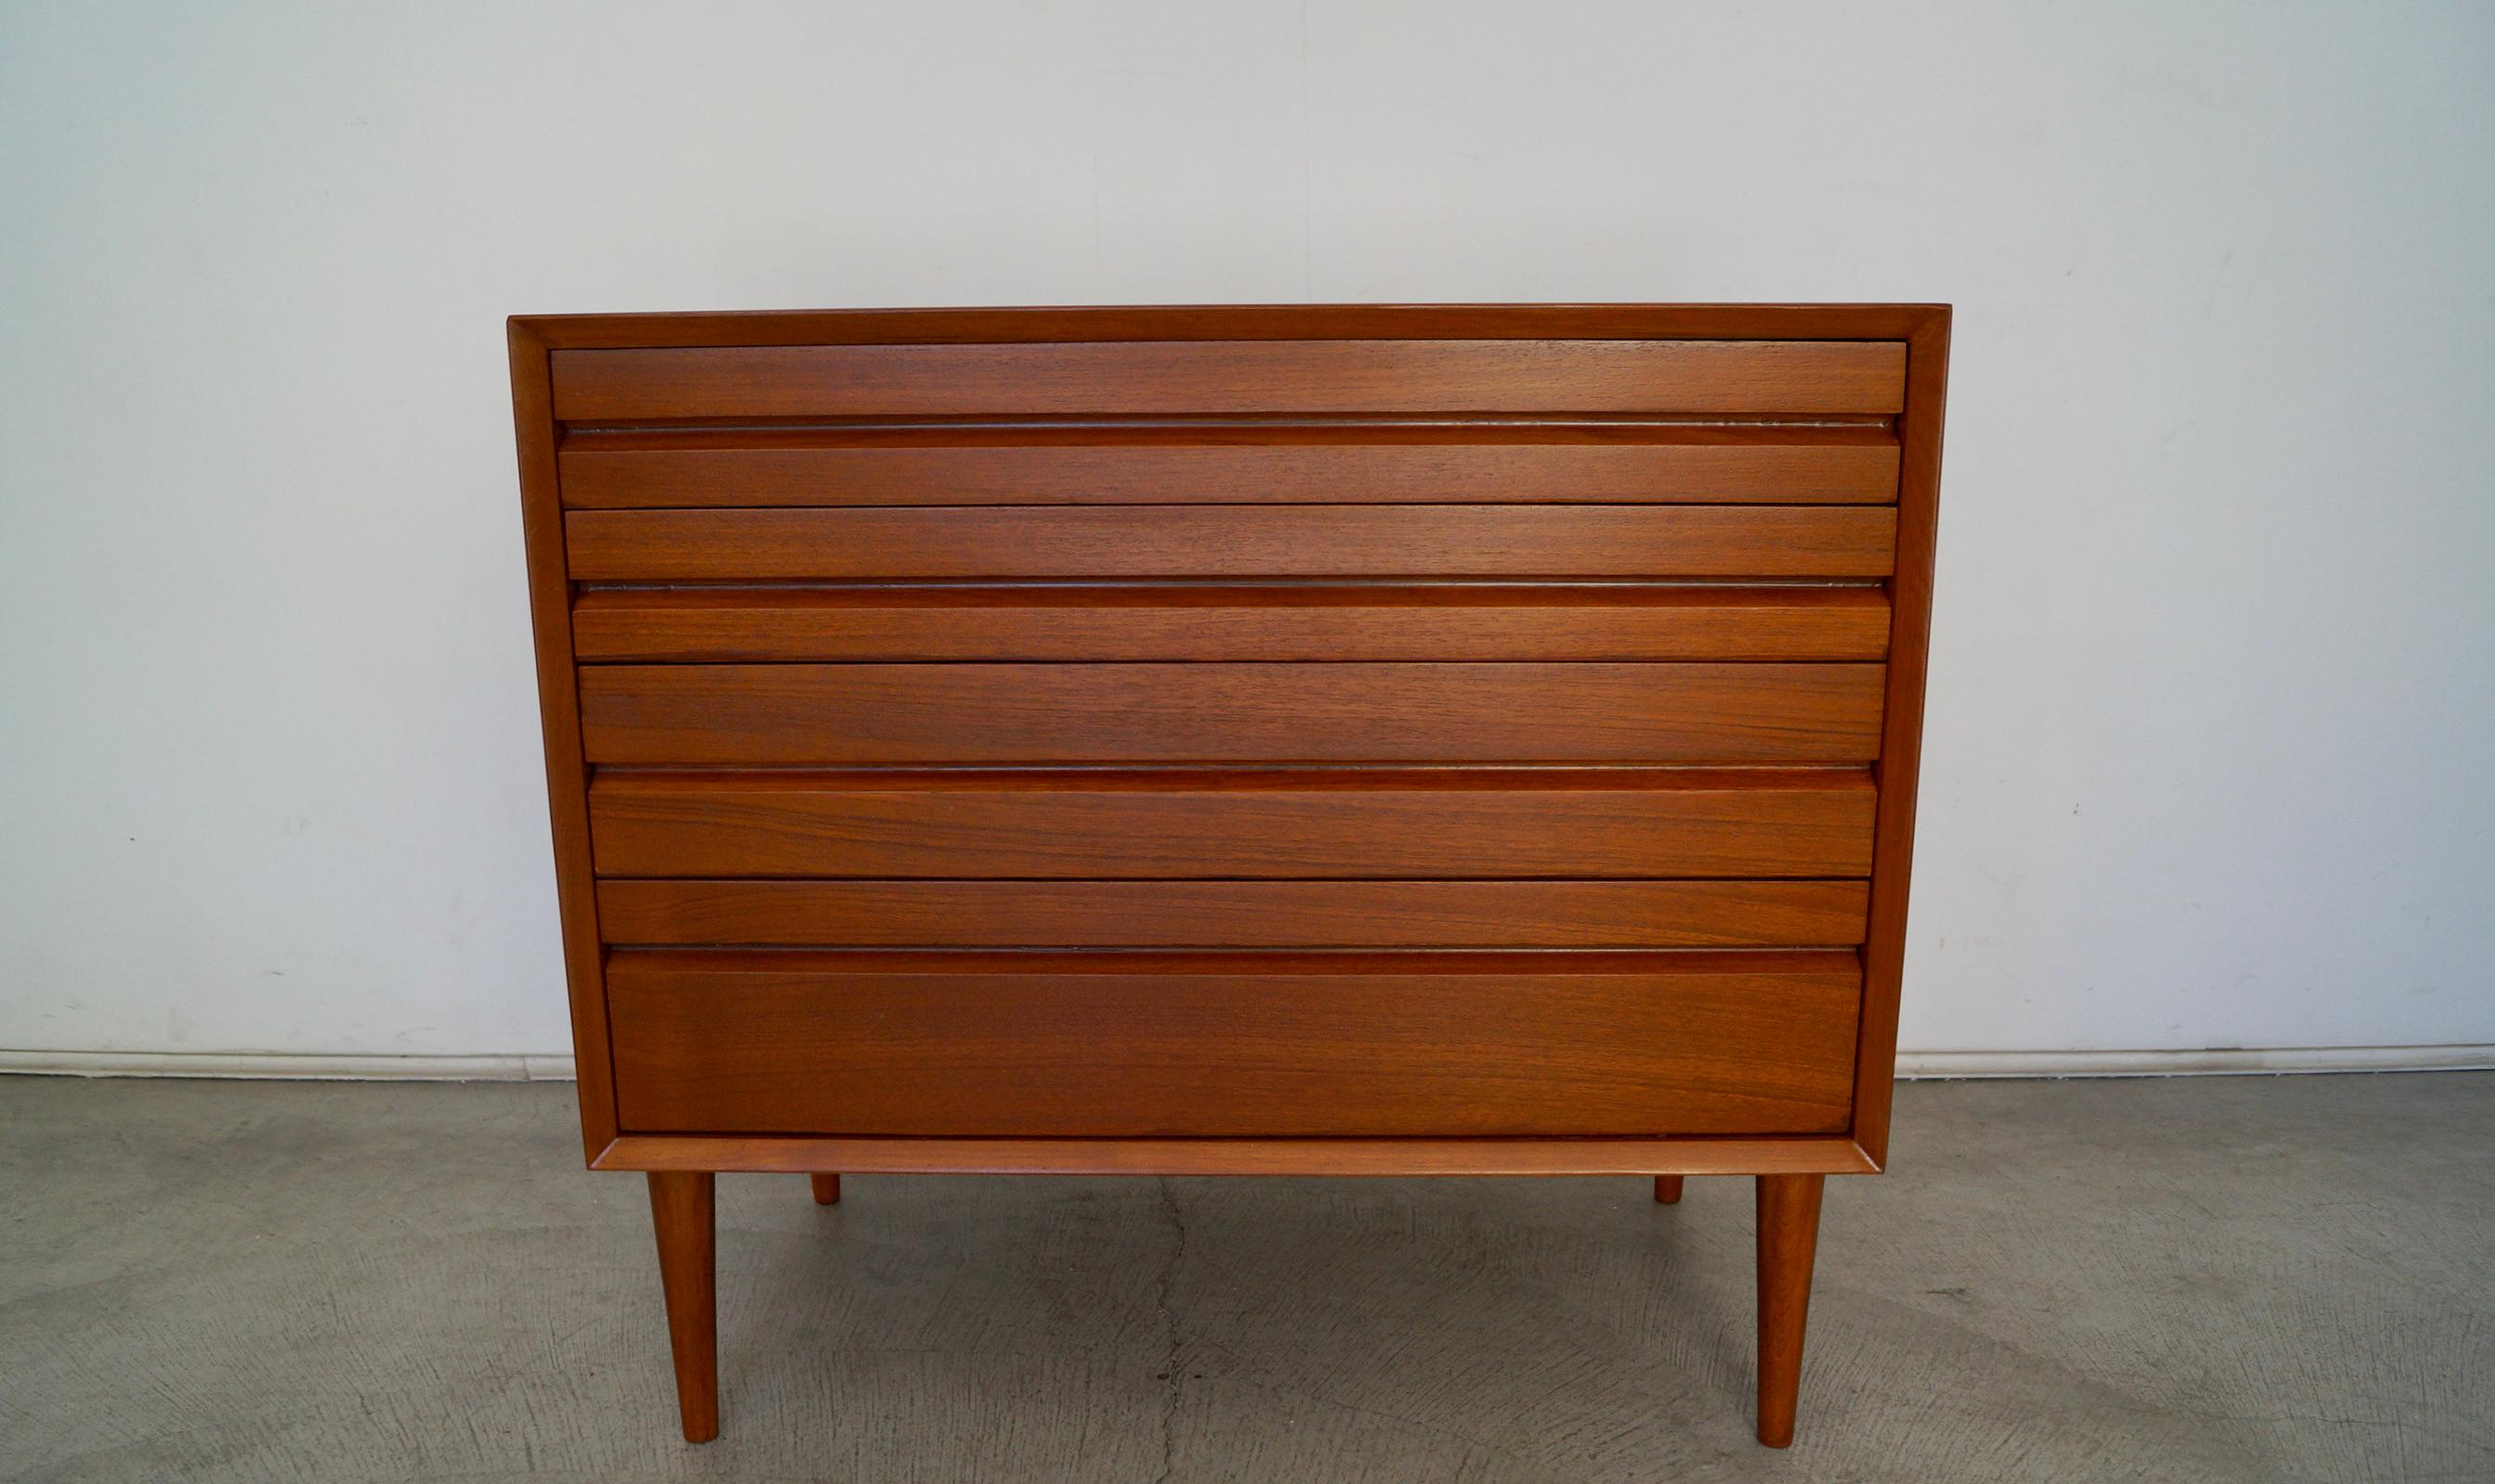 Vintage Mid-century Modern dresser for sale. Original Danish Modern design piece, and made of teak. It has been professionally refinished, and has four drawers. It has the clean Scandinavian design and is really solidly built. It was manufactured in